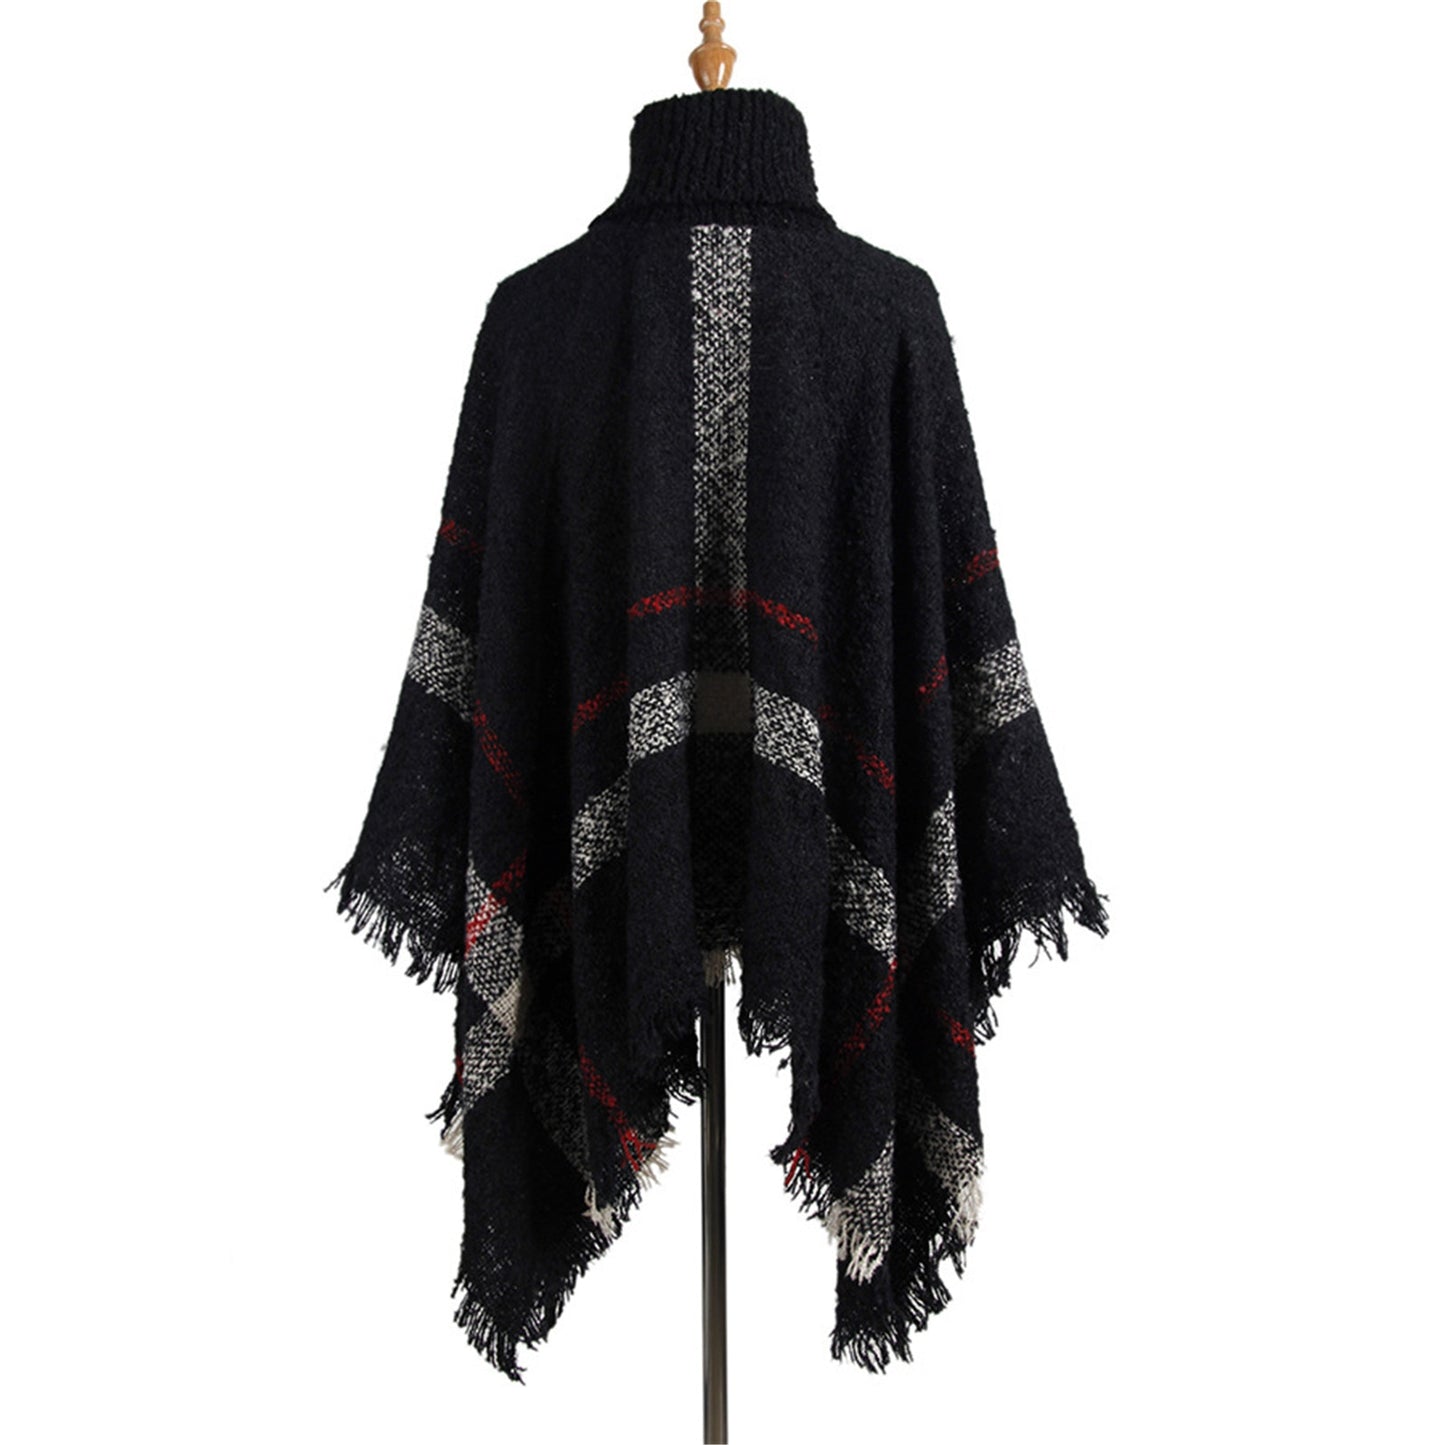 2021 new sweater women European and American mid-length high neck tassel cloak shawl loose large size sweater